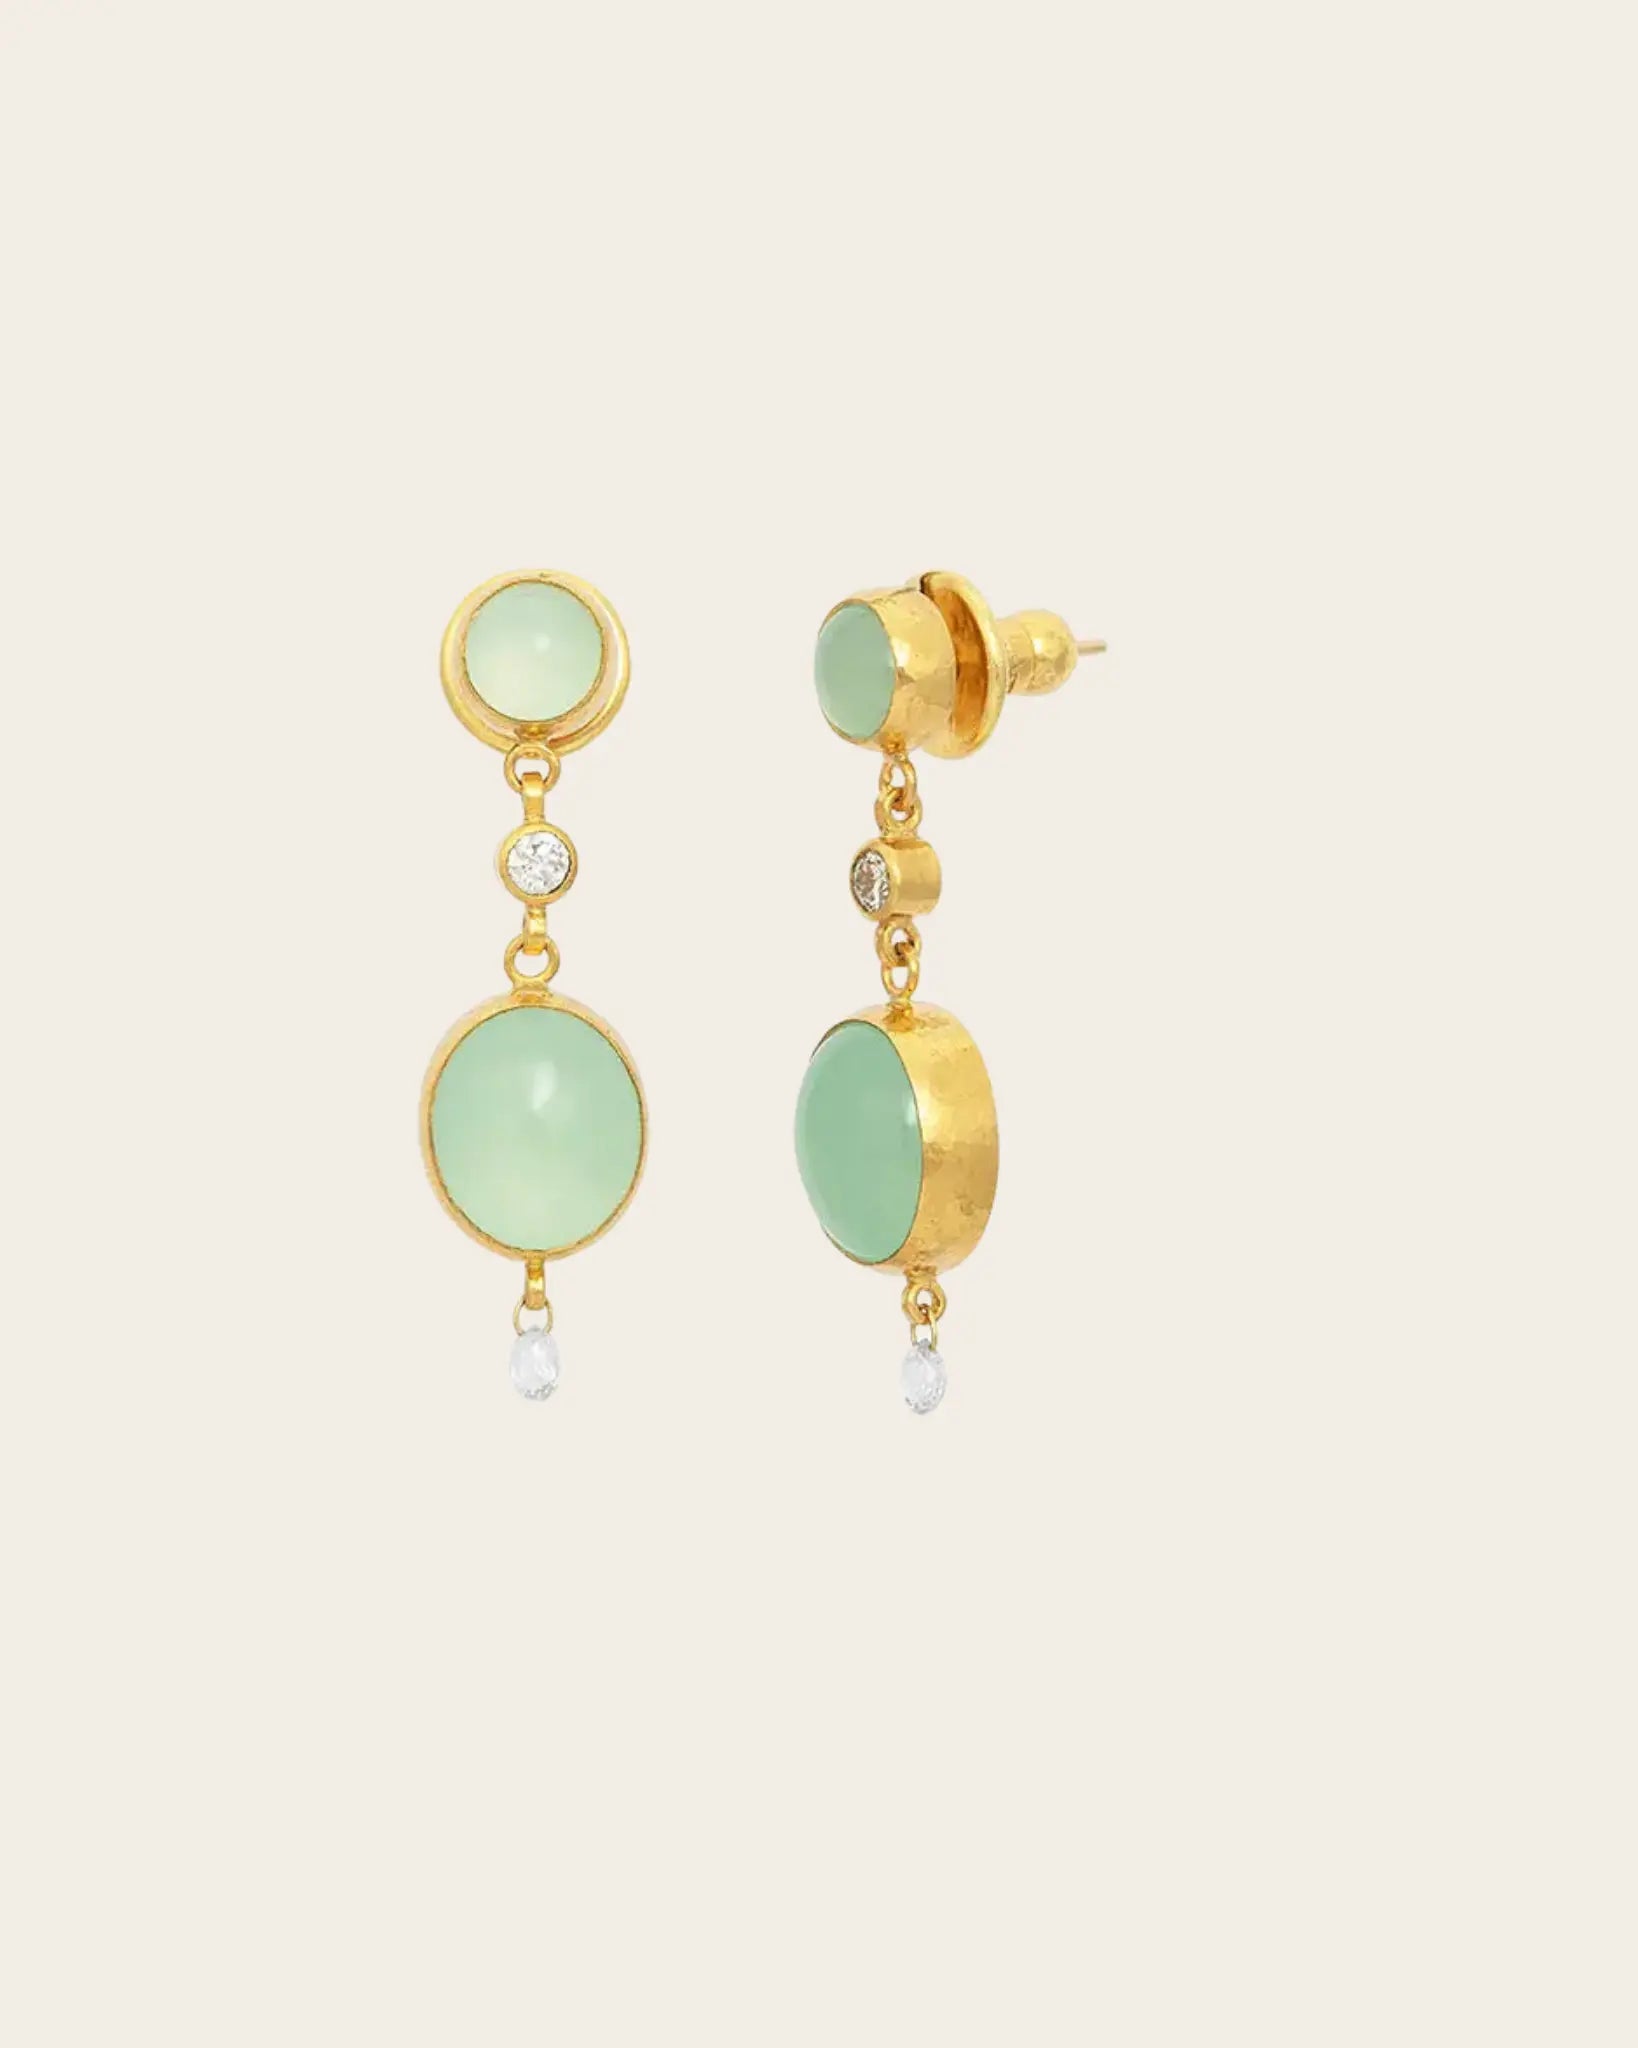 GURHAN Rune Gold Double Drop Earrings, with Chalcedony and Diamond GURHAN Rune Gold Double Drop Earrings, with Chalcedony and Diamond Gurhan Gurhan  Squash Blossom Vail